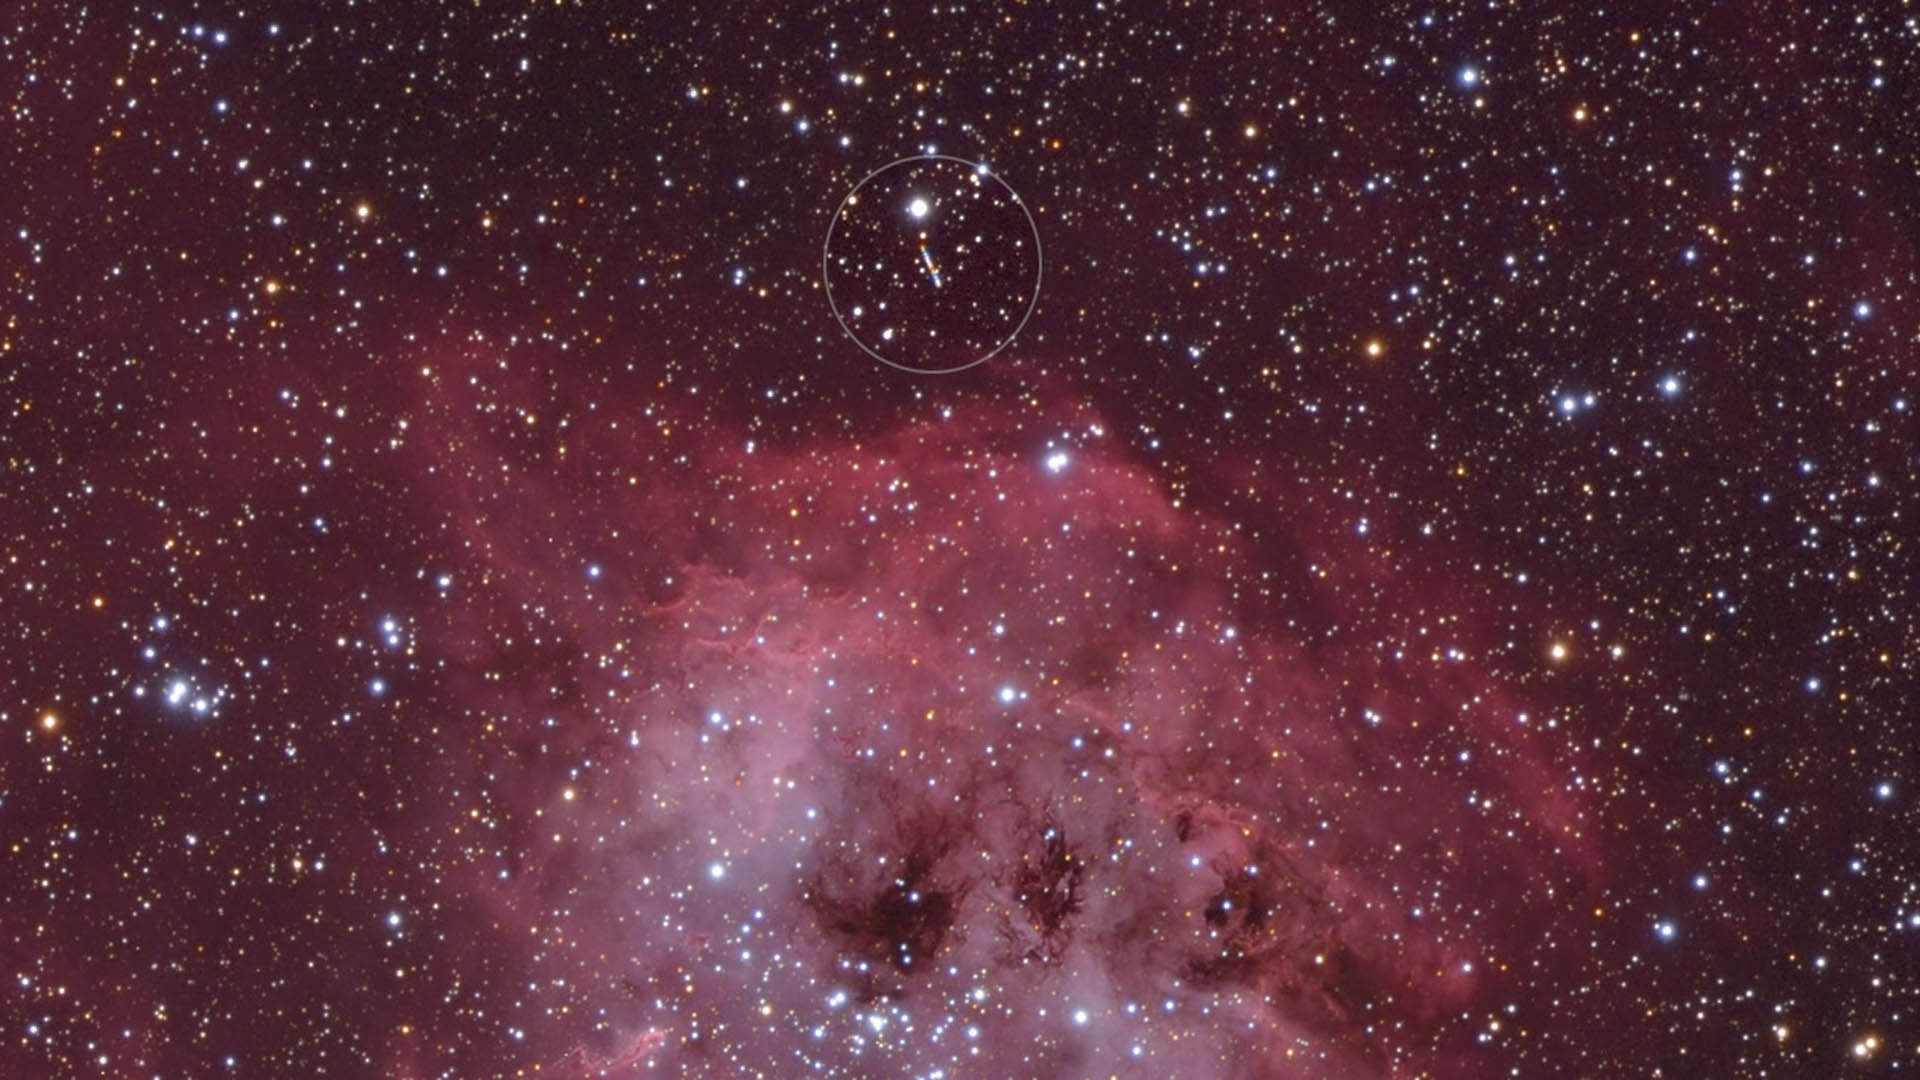 A typical image near the ecliptic: the minor planet 81 Terpsichore (marked with a circle) causes a bright trail on this image of the nebula IC 410. M. Weigand